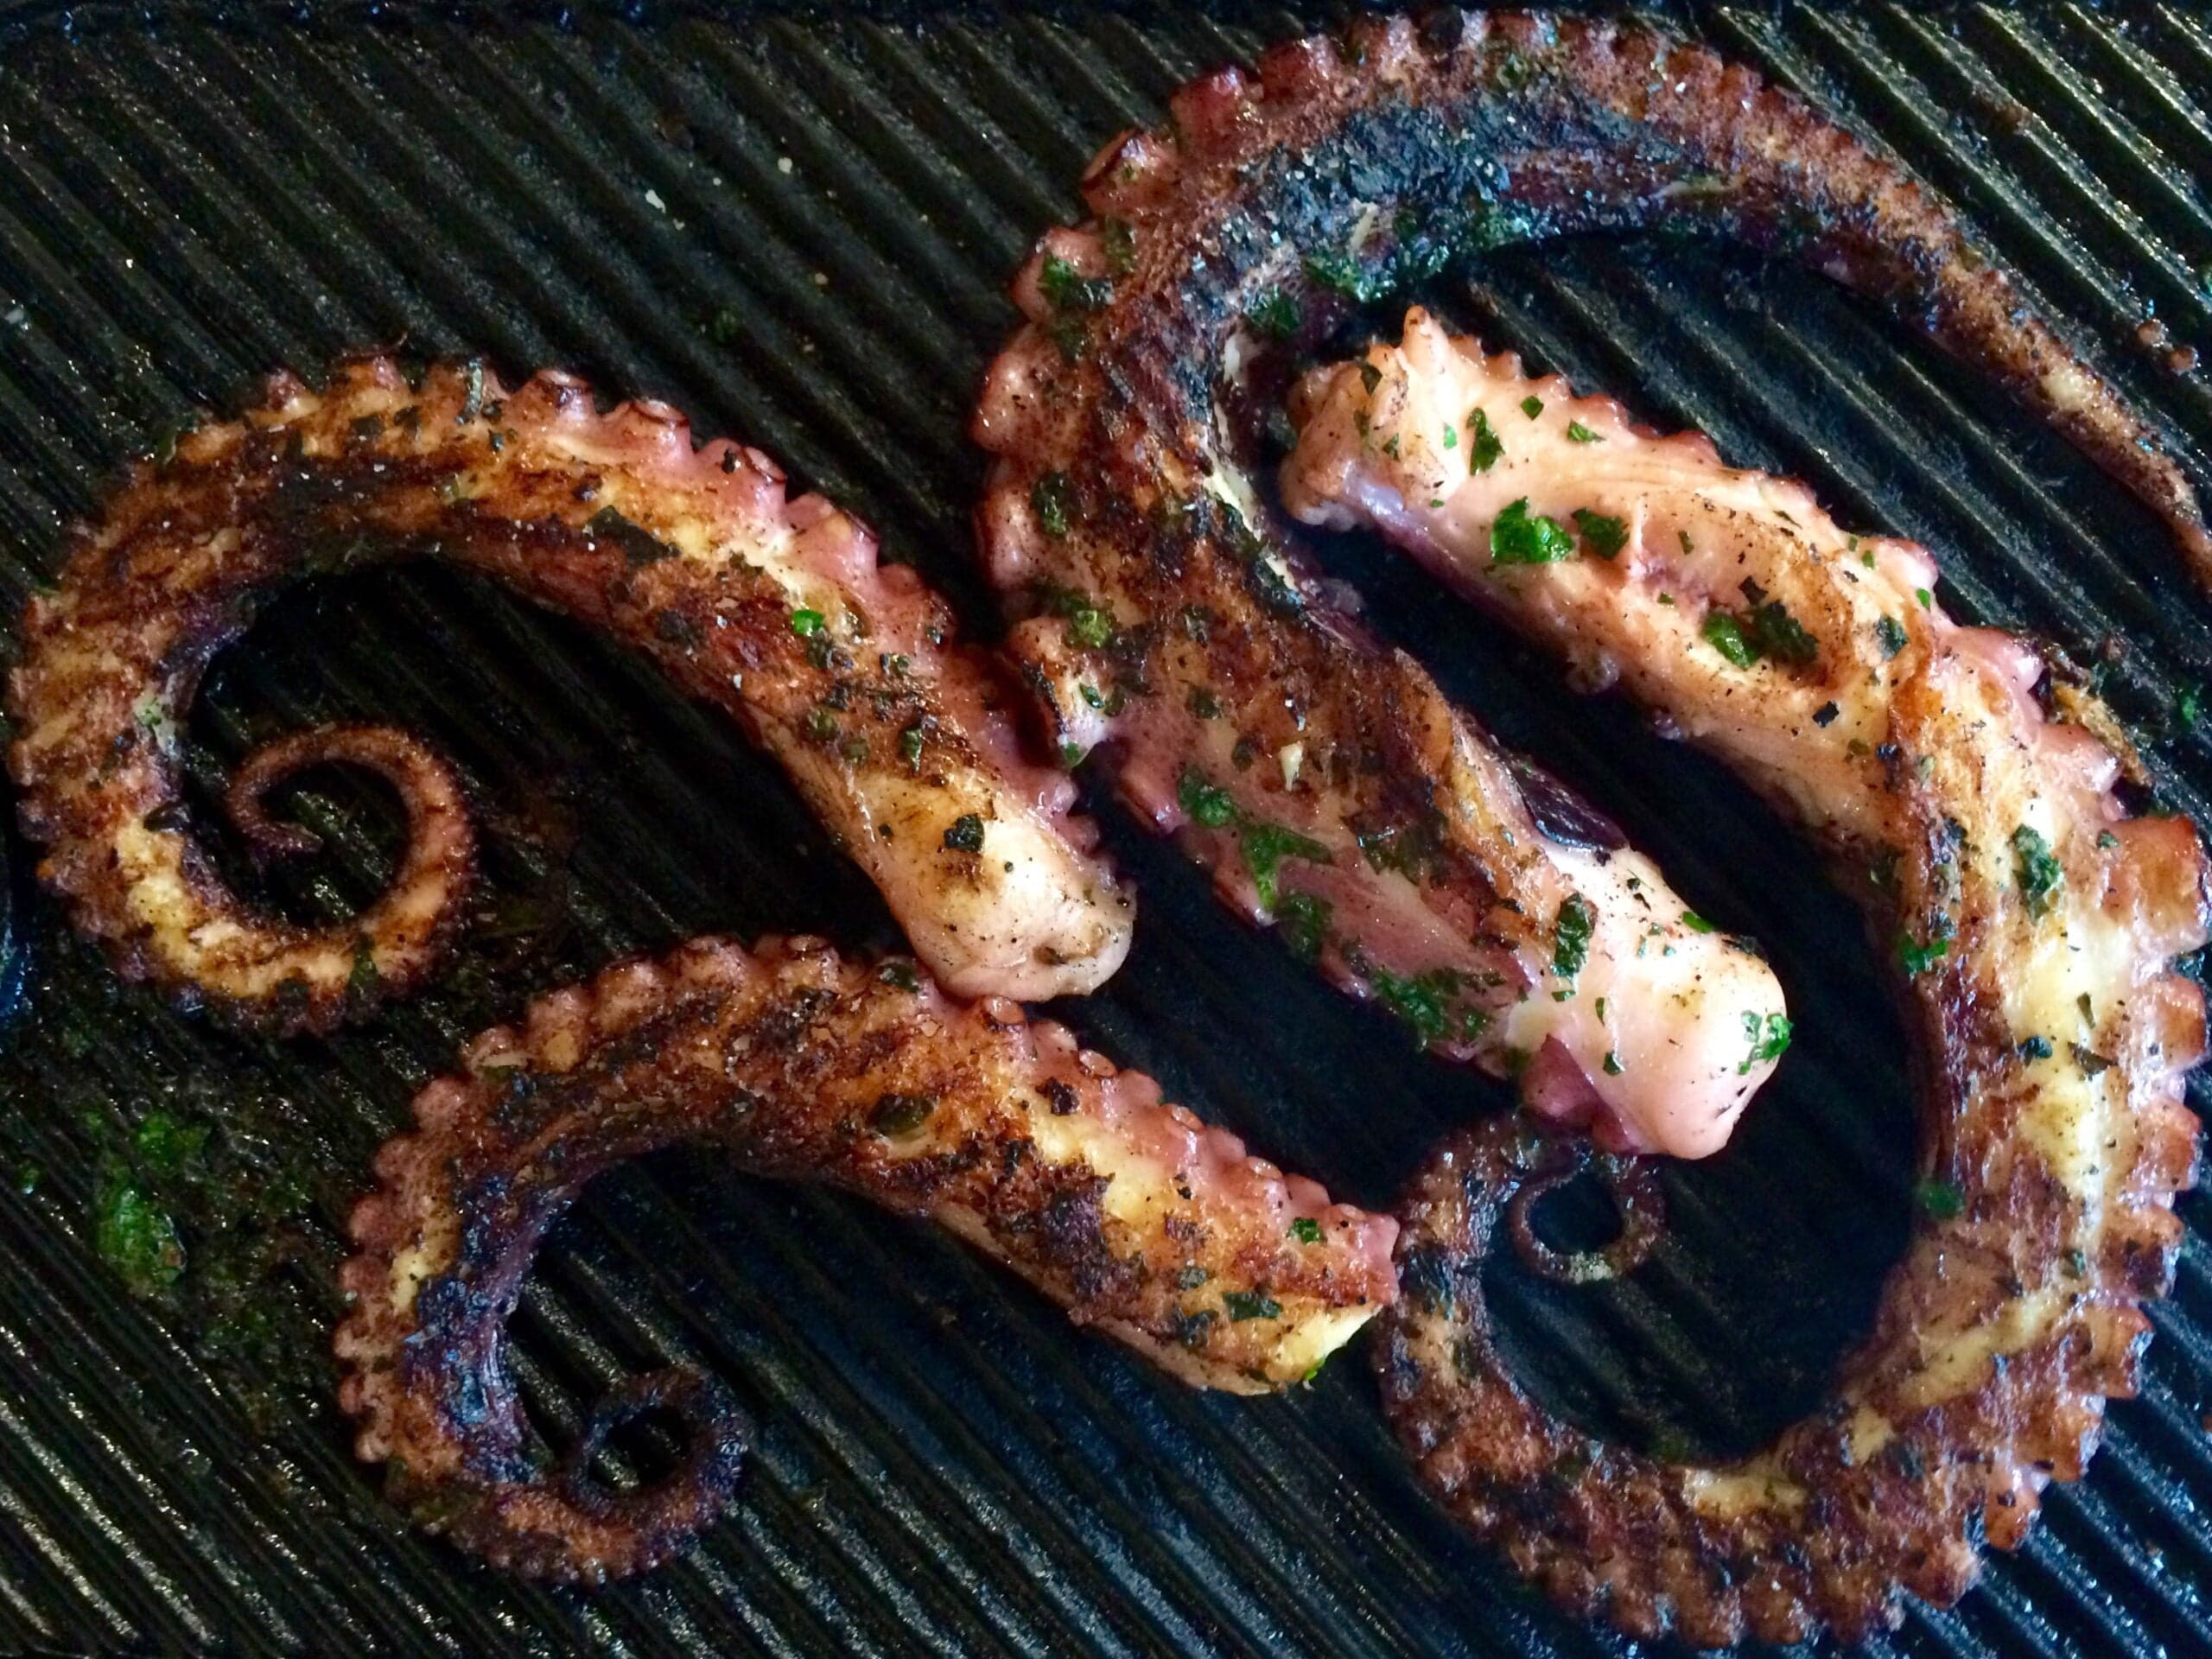 Grilling Octopus